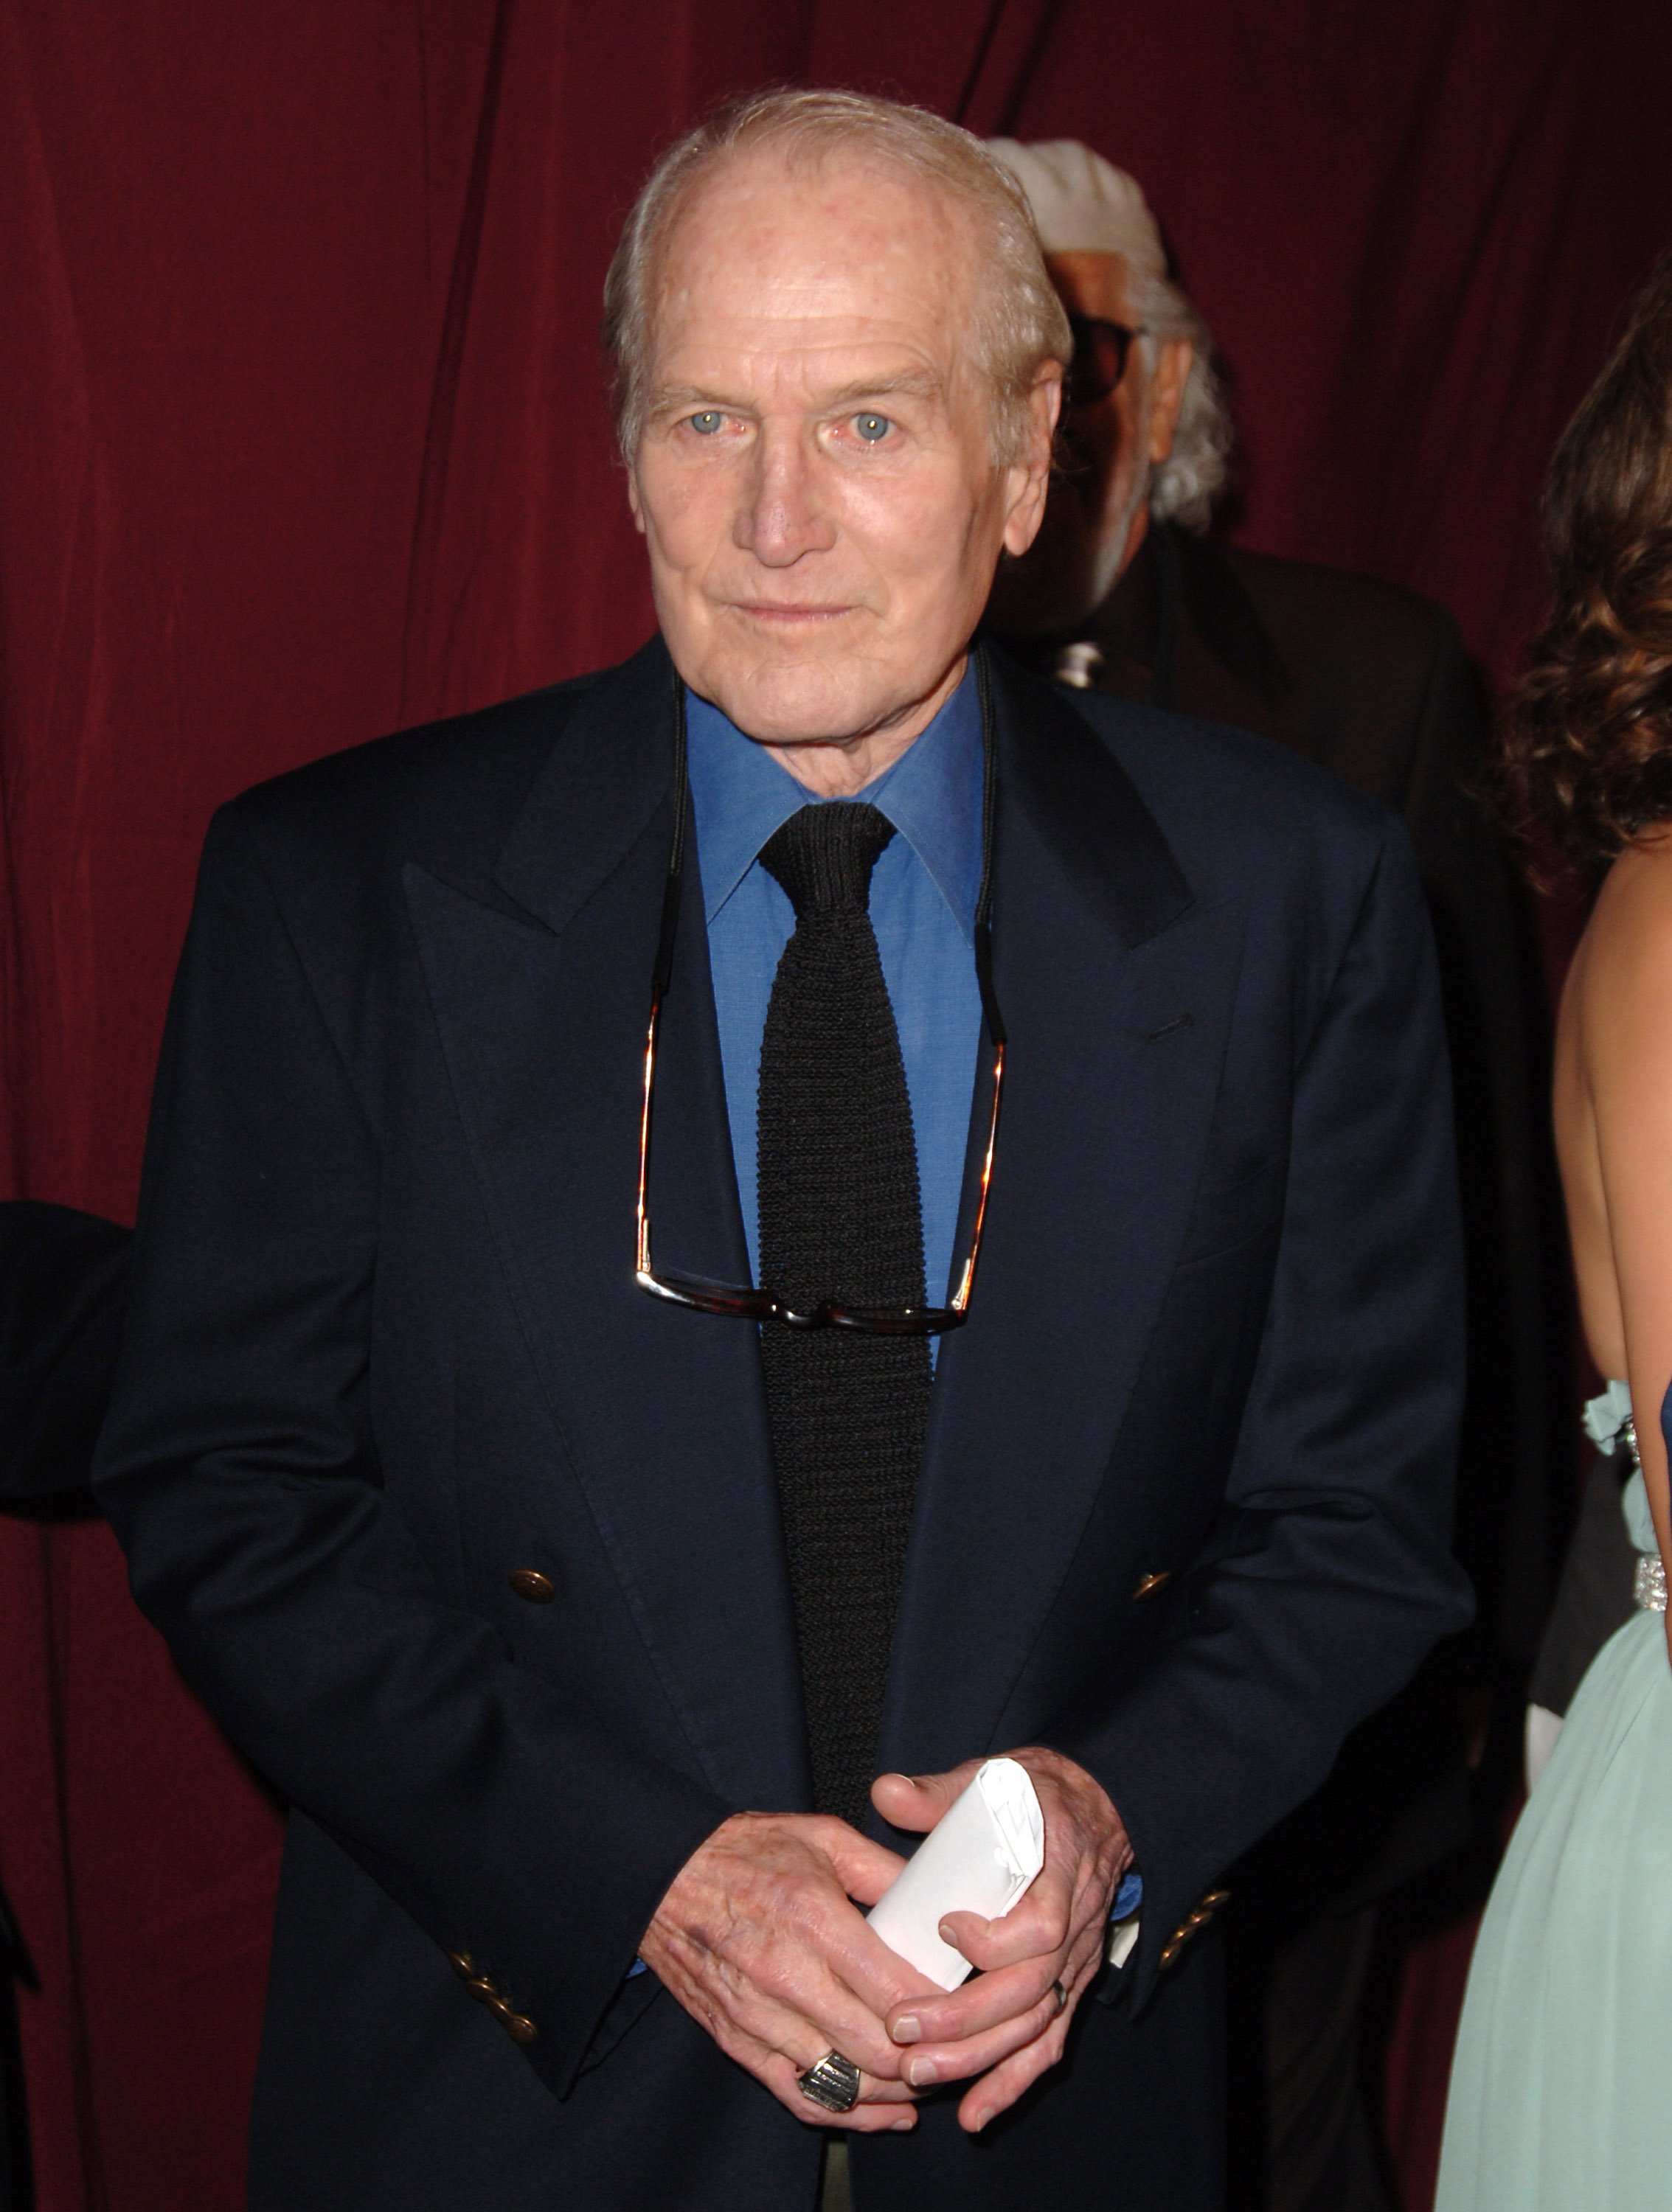 Paul Newman at the Kodak Theatre in Hollywood, California on November 10, 2006. | Photo: Getty Images